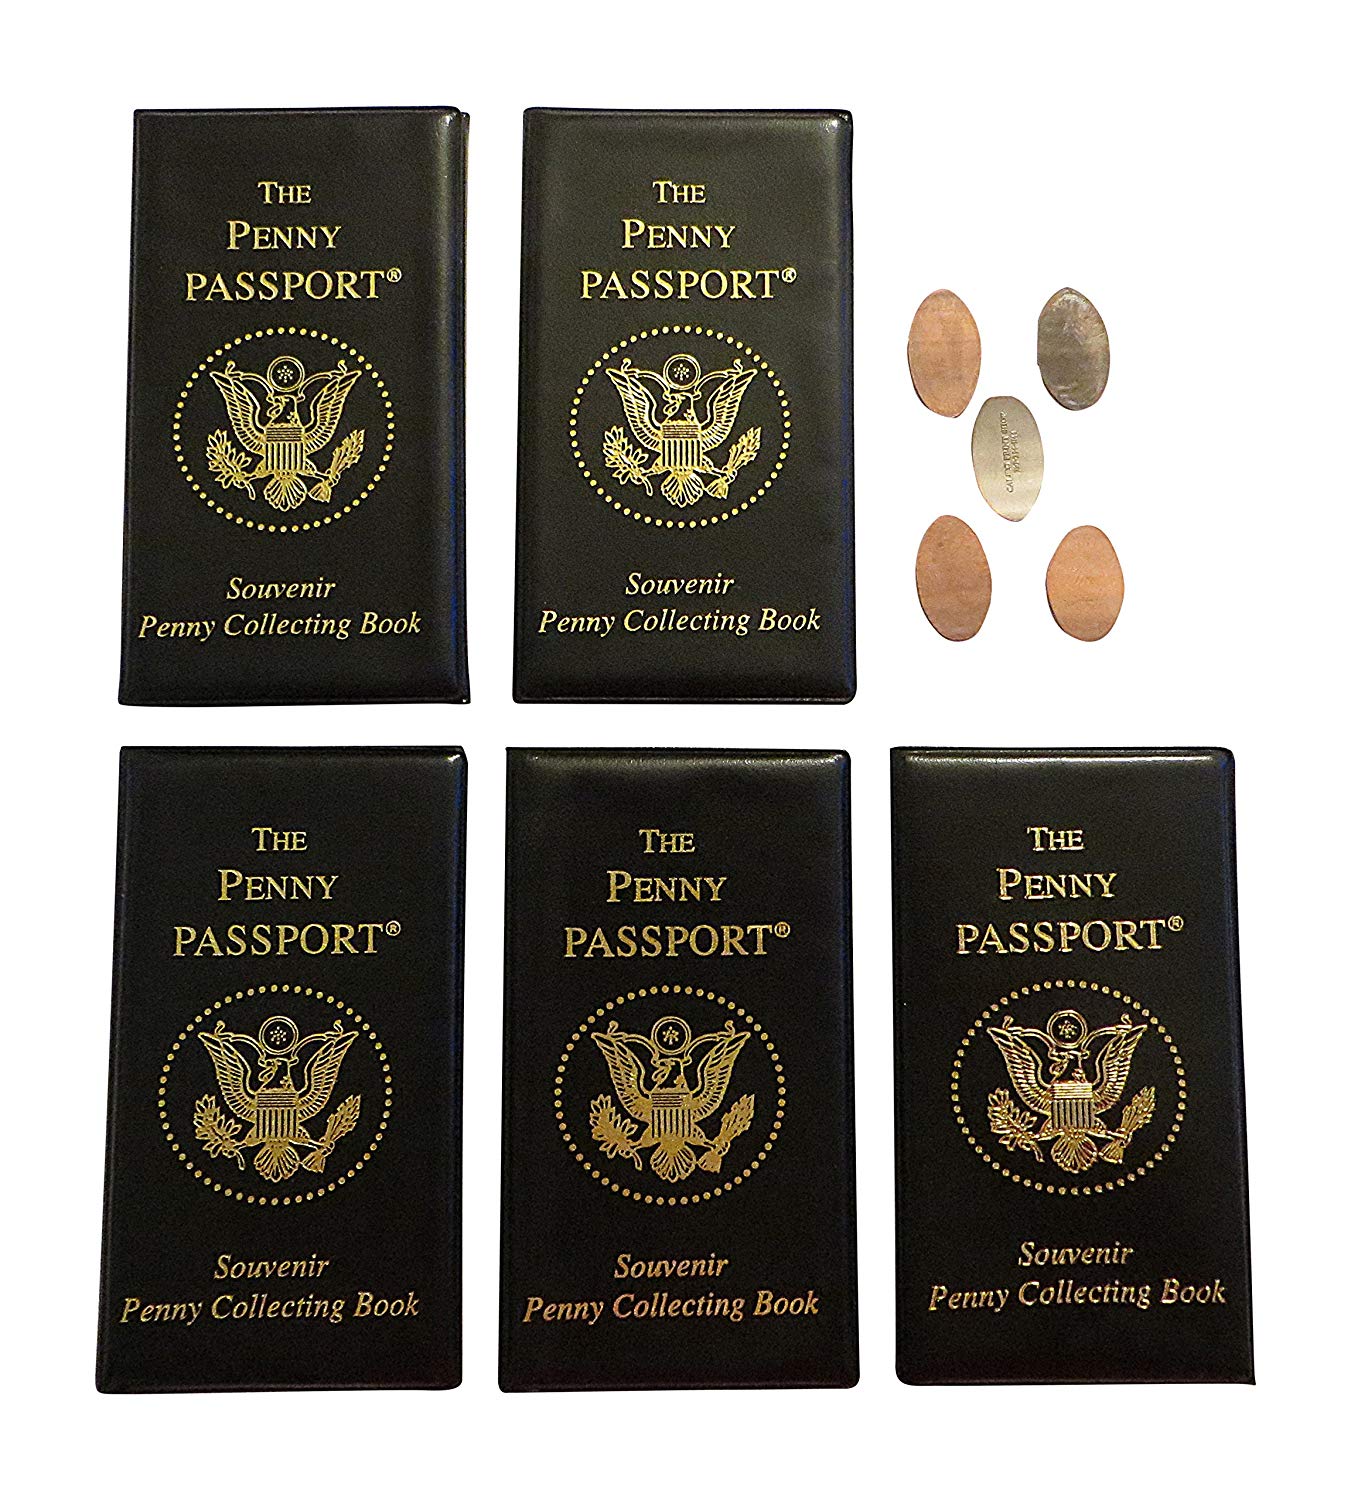 5 Penny Passport Souvenir Elongated Coin Albums With Free Pressed